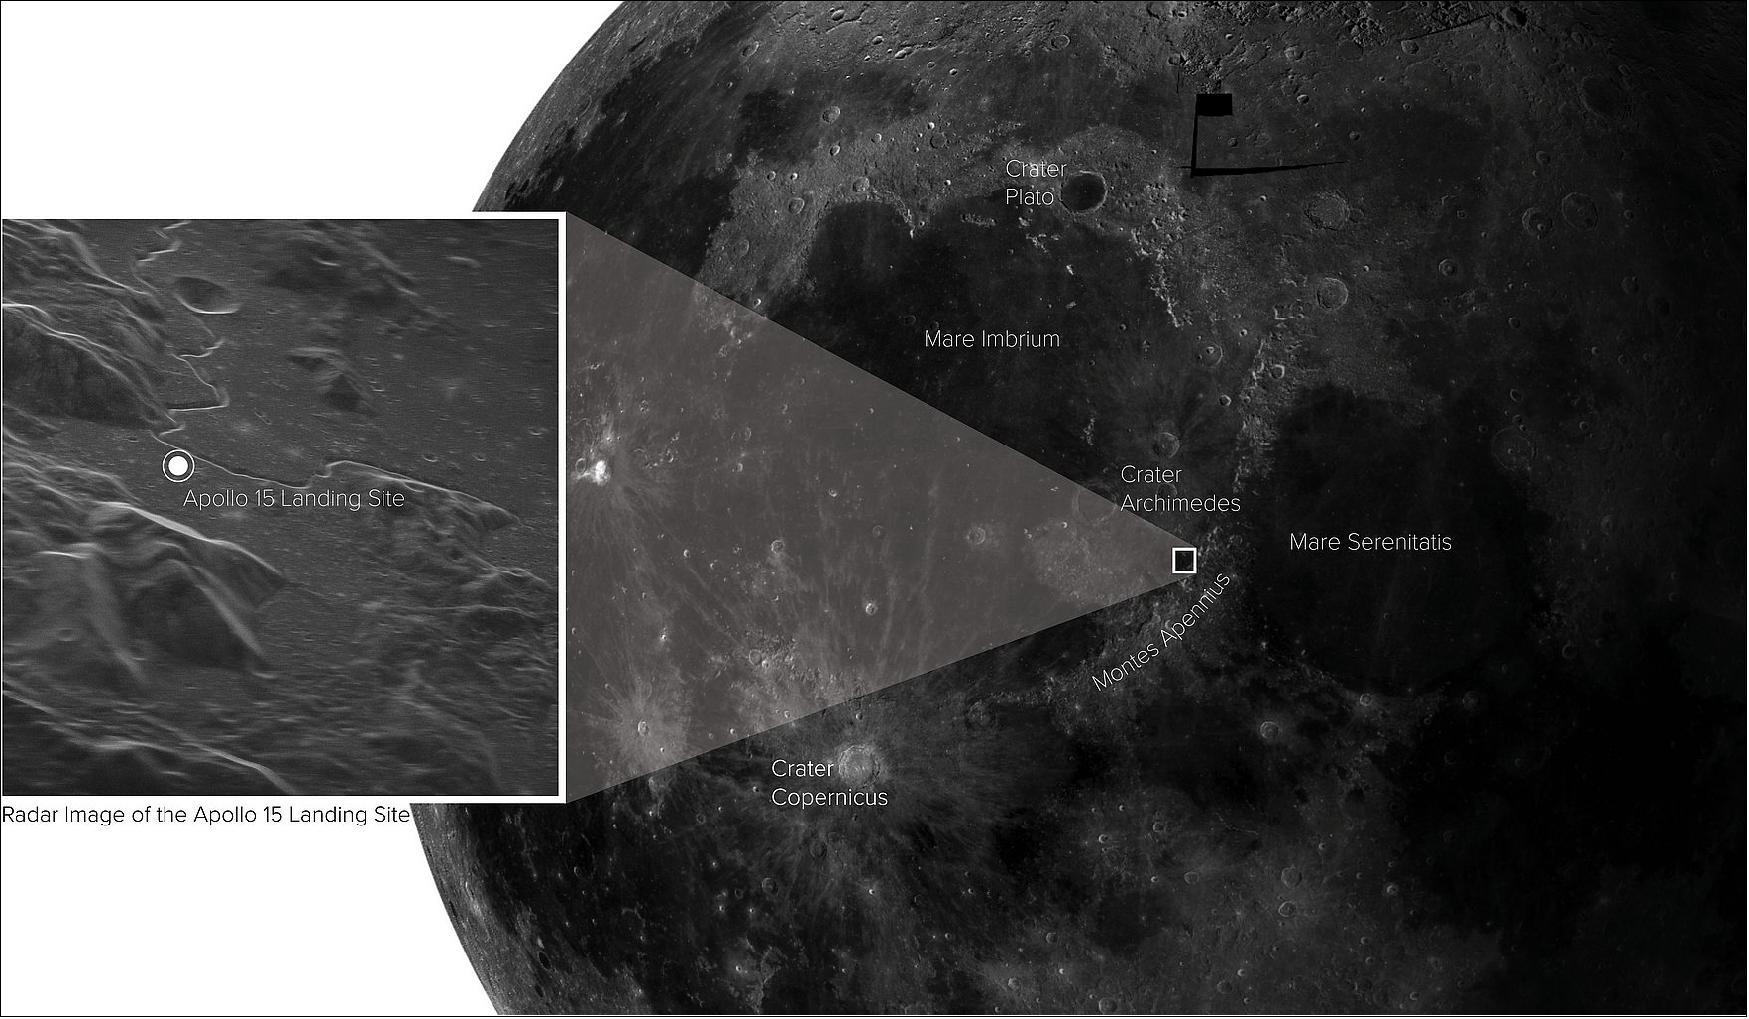 Figure 31: New radar image of the Apollo 15 landing site, located with respect to prominent lunar features (image credit: Sophia Dagnello, NRAO/GBO/Raytheon/AUI/NSF/USGS)